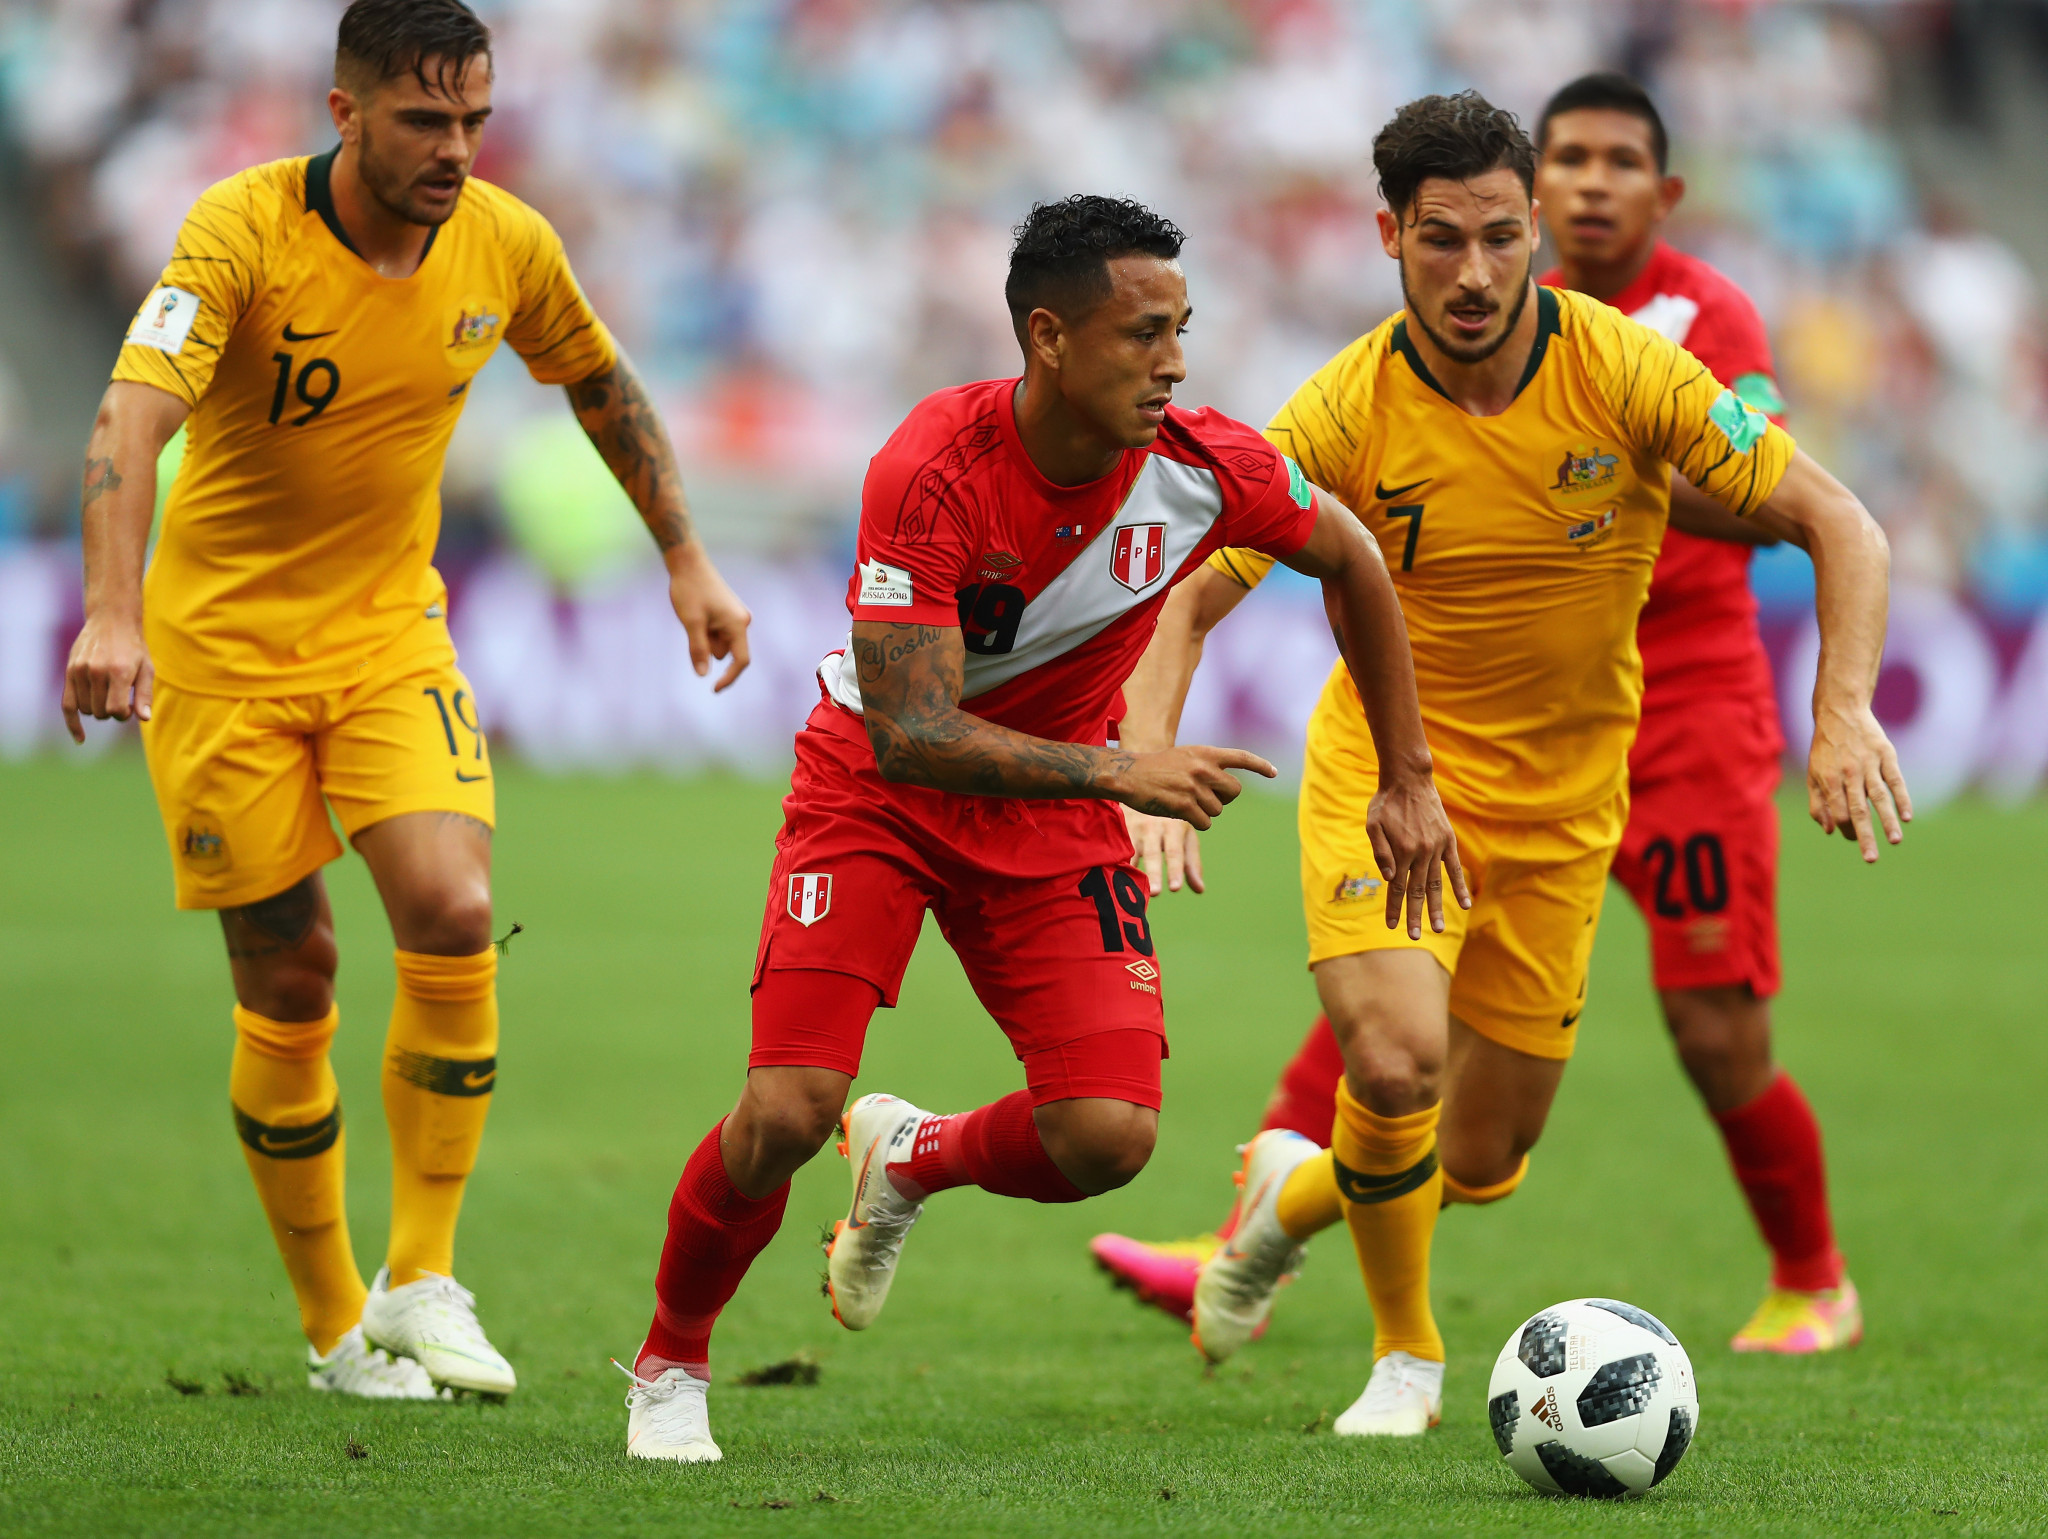 Australia pictured facing Peru during the FIFA World Cup ©Getty Images